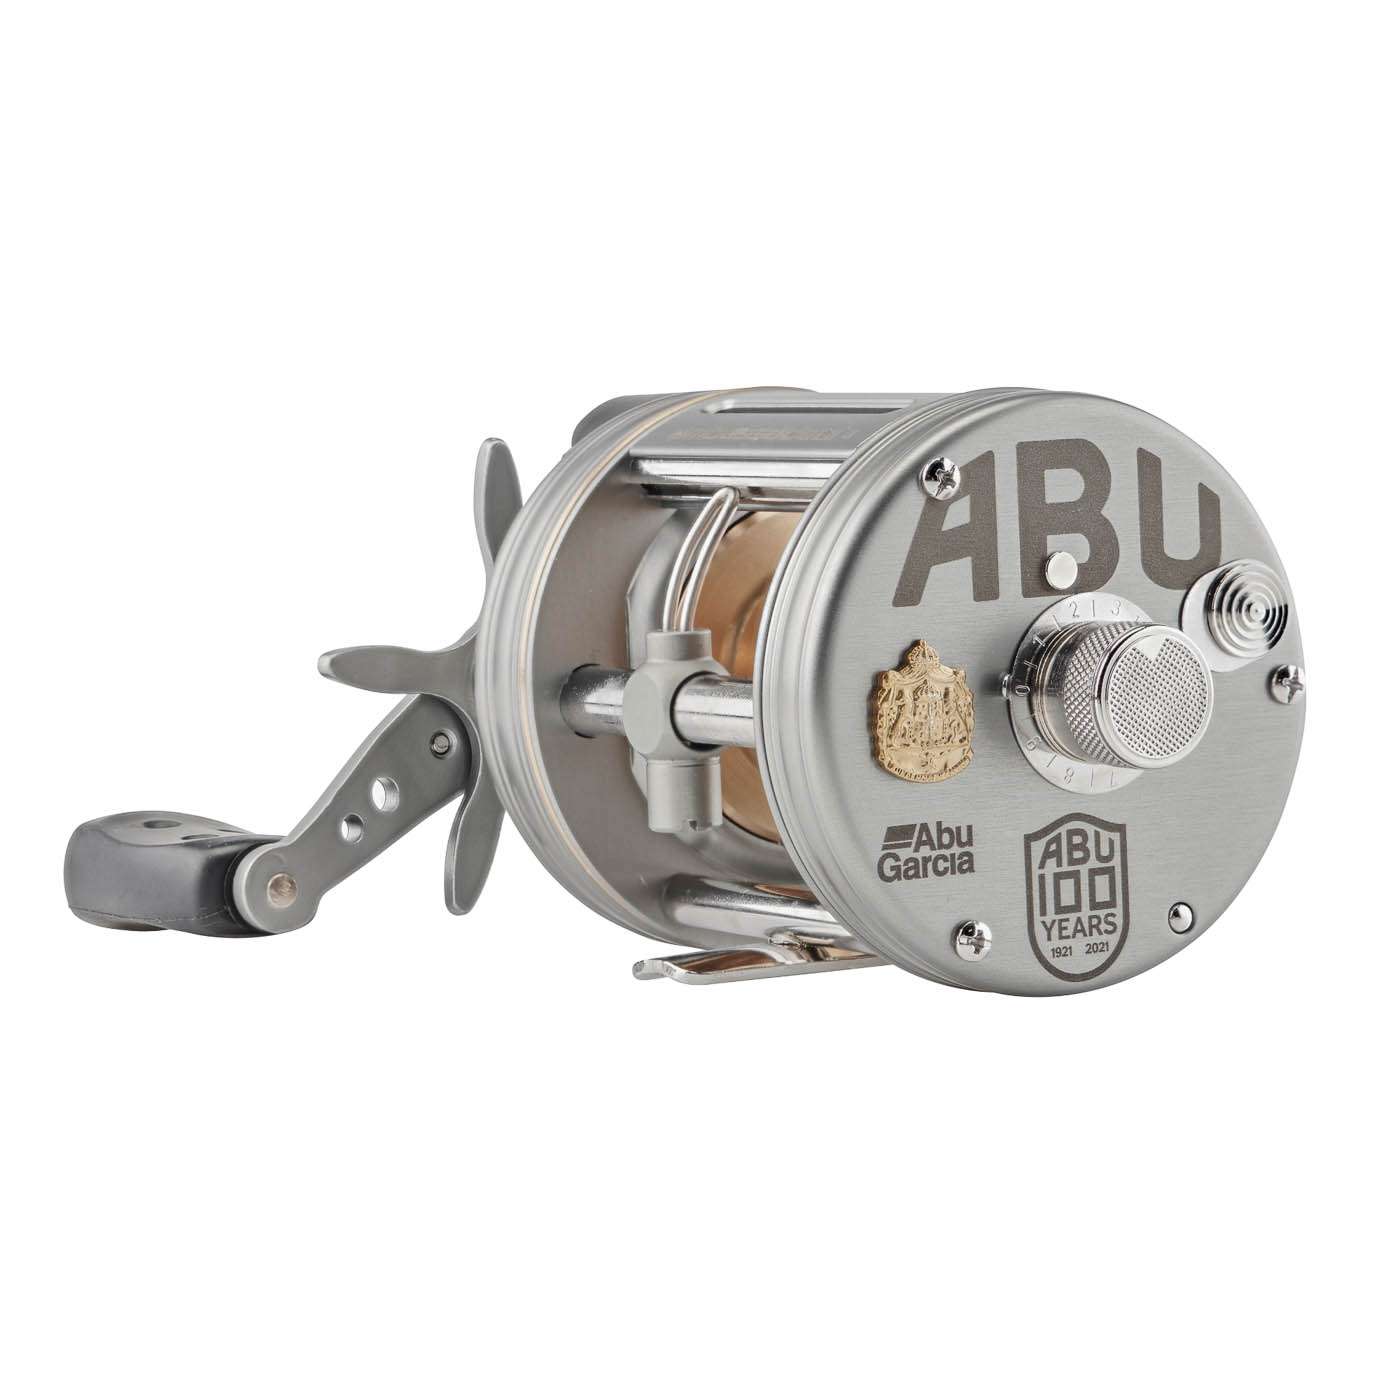 <p><strong>Abu Pro Rocket 100-year anniversary round reel</strong></p><p>The Abu Pro Rocket 100-year anniversary round reel calls on the heritage of dependability and durability with a reel that delivers on the trusted Ambassadeur promise of providing anglers with years of dependable service. Key features are 4 stainless steel ball bearings +1 roller bearing, a Carbon Matrix drag system, a 6 centrifugal brake system that provides consistent brake pressure throughout casts, and a synchronized level wind system that improves line lay and castability. Made in Sweden. $249.99. <a href=